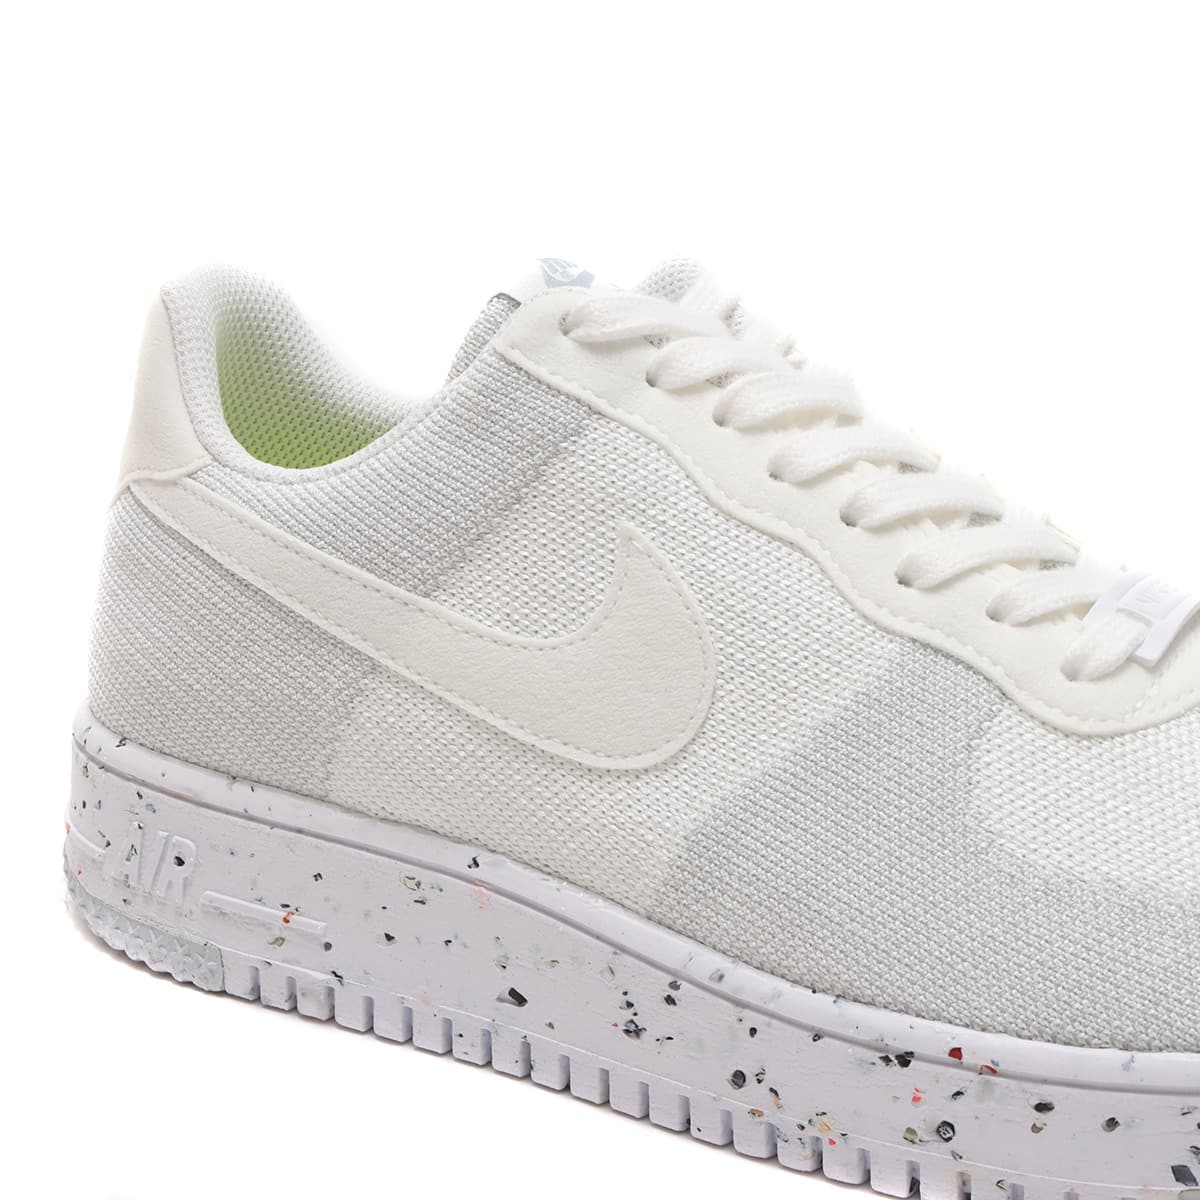 NIKE AF1 CRATER FLYKNIT WHITE/WHITE-SAIL-WOLF GREY 21SU-I